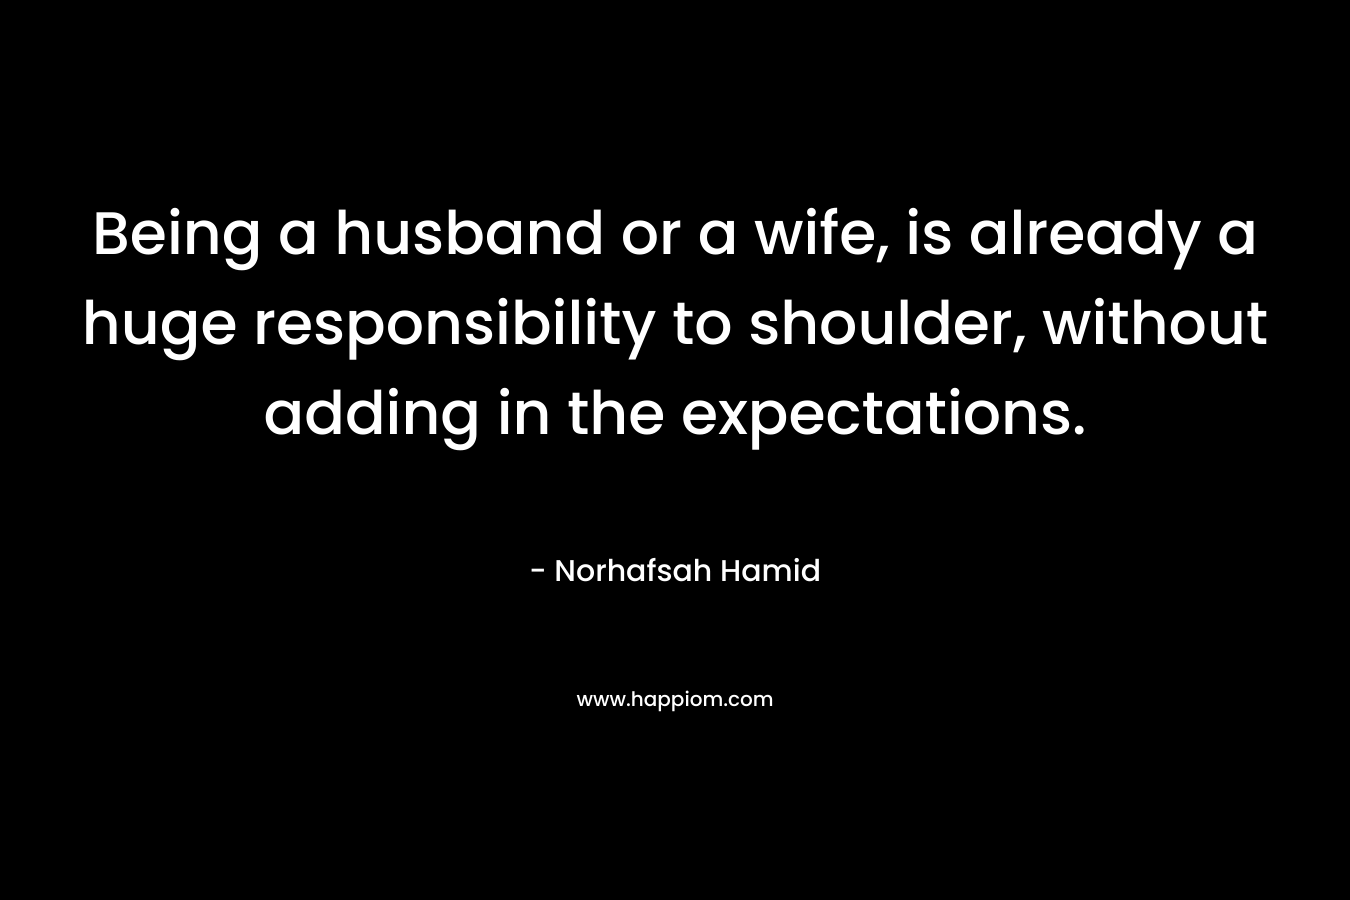 Being a husband or a wife, is already a huge responsibility to shoulder, without adding in the expectations. – Norhafsah Hamid